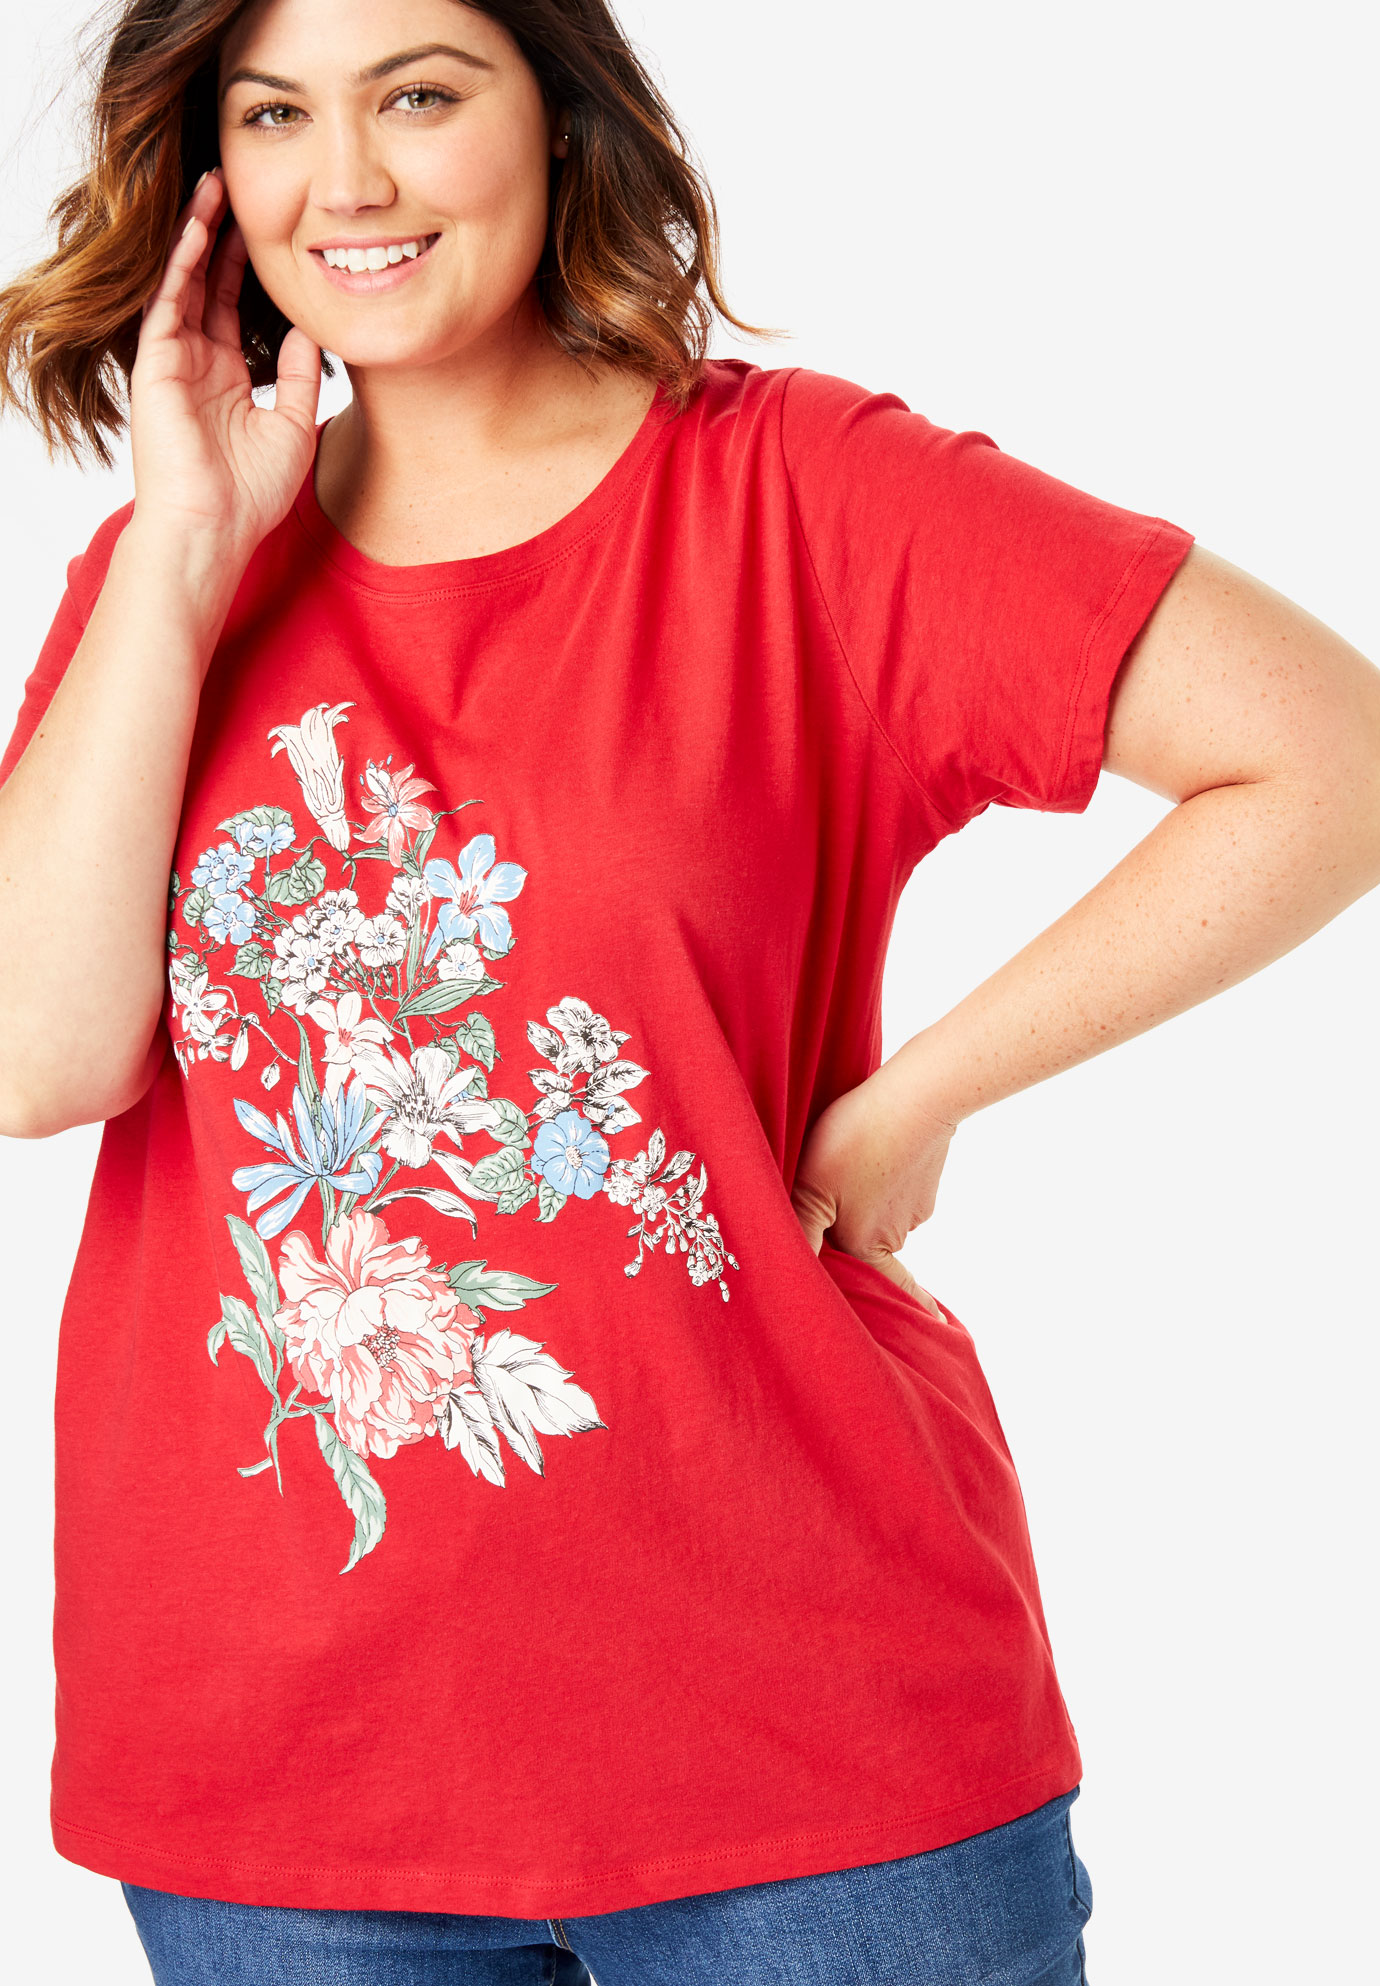 Graphic Tee| Plus Size Tops | Woman Within